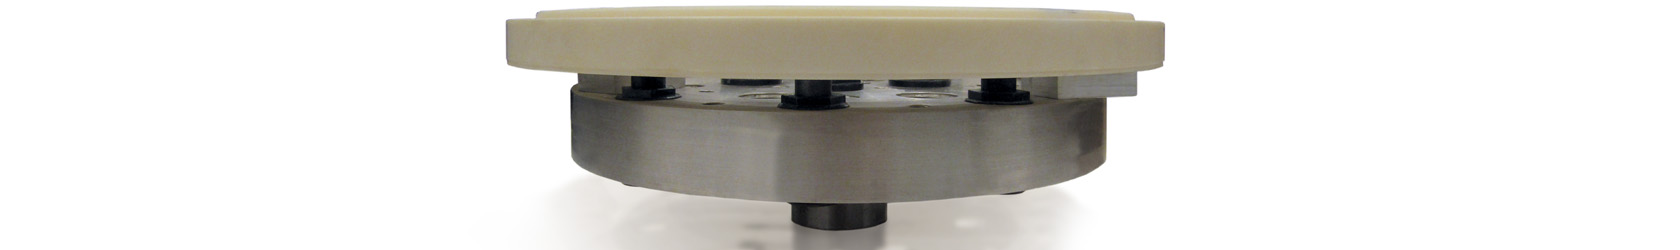 Photo of a ceramic part being held to a Blue Photon workholding fixture